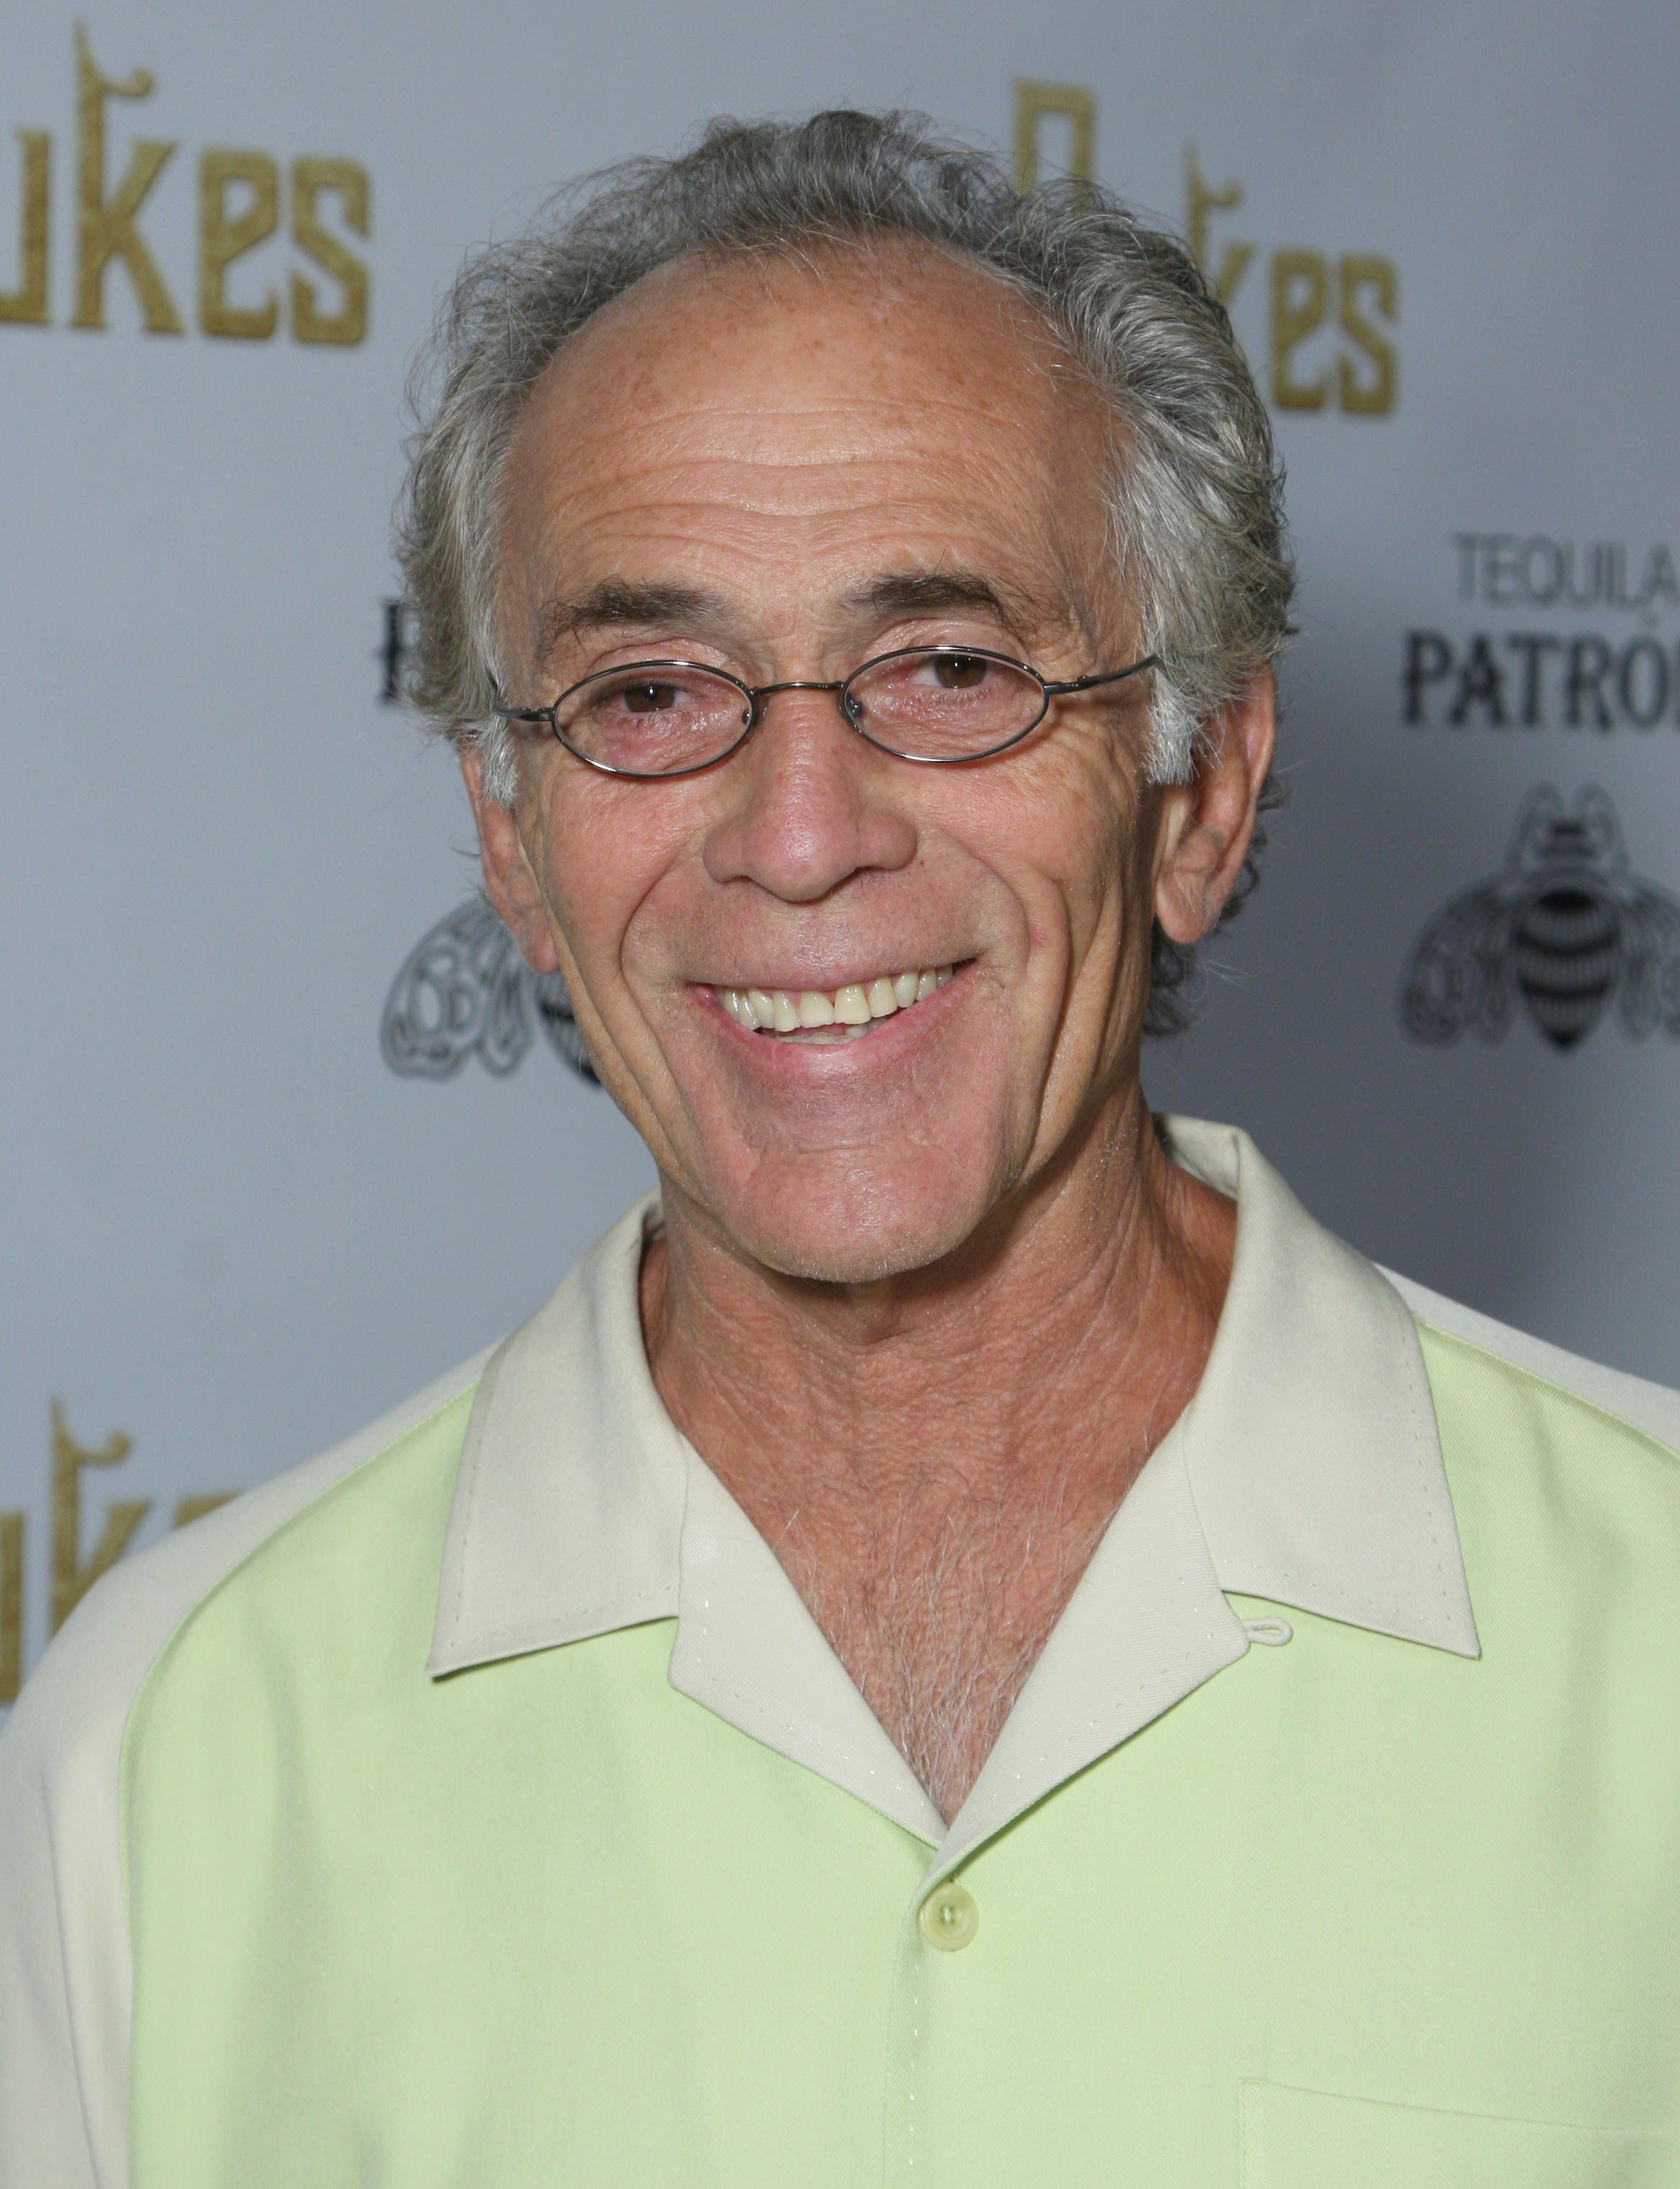 Actor Bruce Weitz attends a special screening of Robert Davi's "The Dukes" on August 27, 2007 in Los Angeles, California. | Source: Getty Images